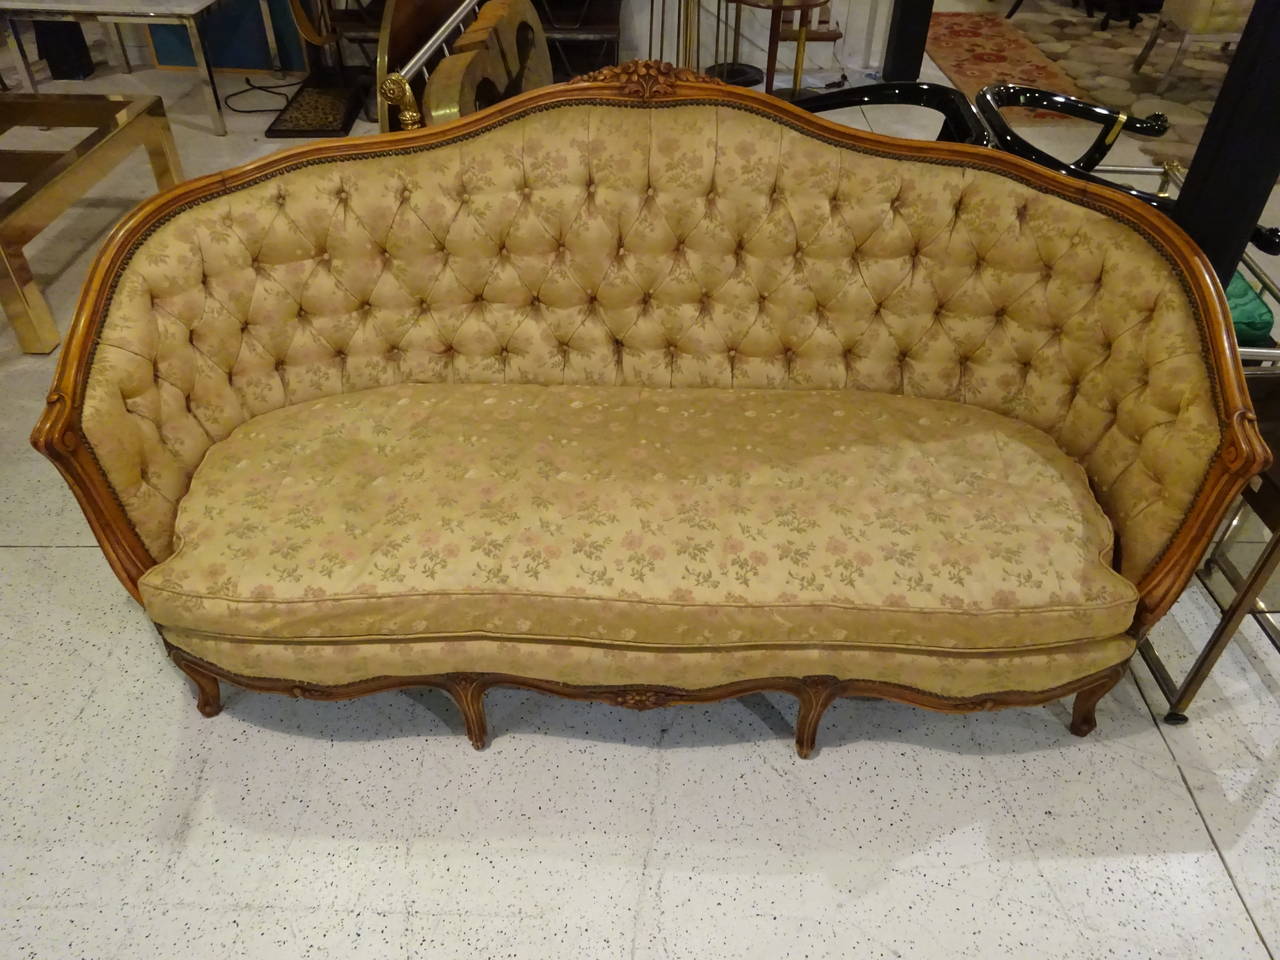 A 19th Century Louis XV style sofa, with finely carved walnut frame and vintage upholstery which shows signs of wear and use
On final sale reduced to $849!